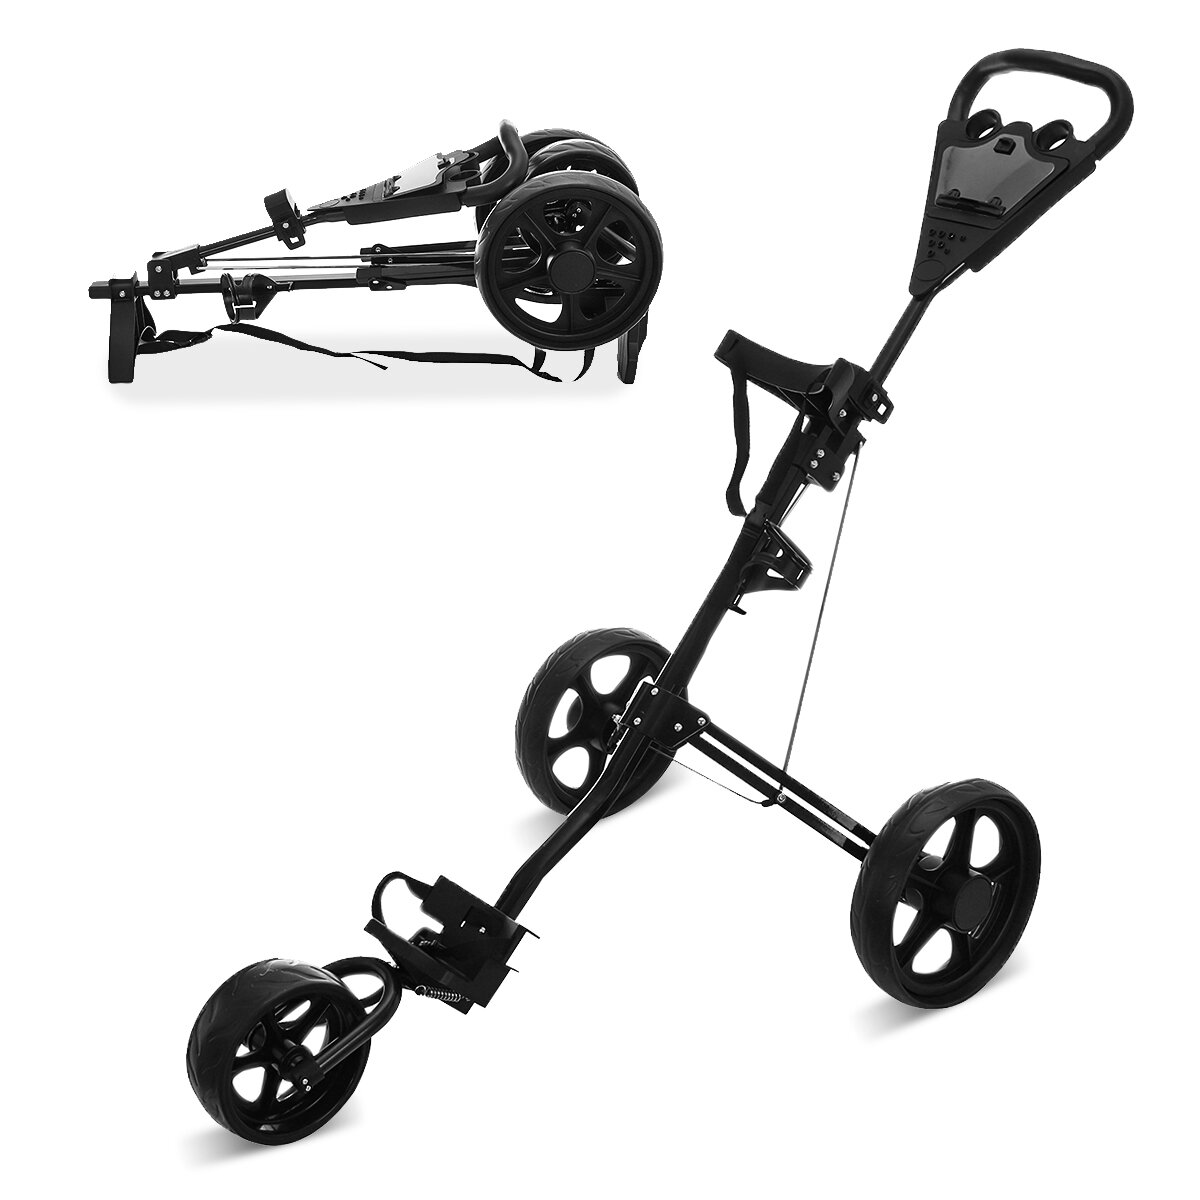 Image of 3 Wheel Folding Golf Cart Pull Push Trolley with Scorecard Cup Holder Foot Brake Outdoor Sport